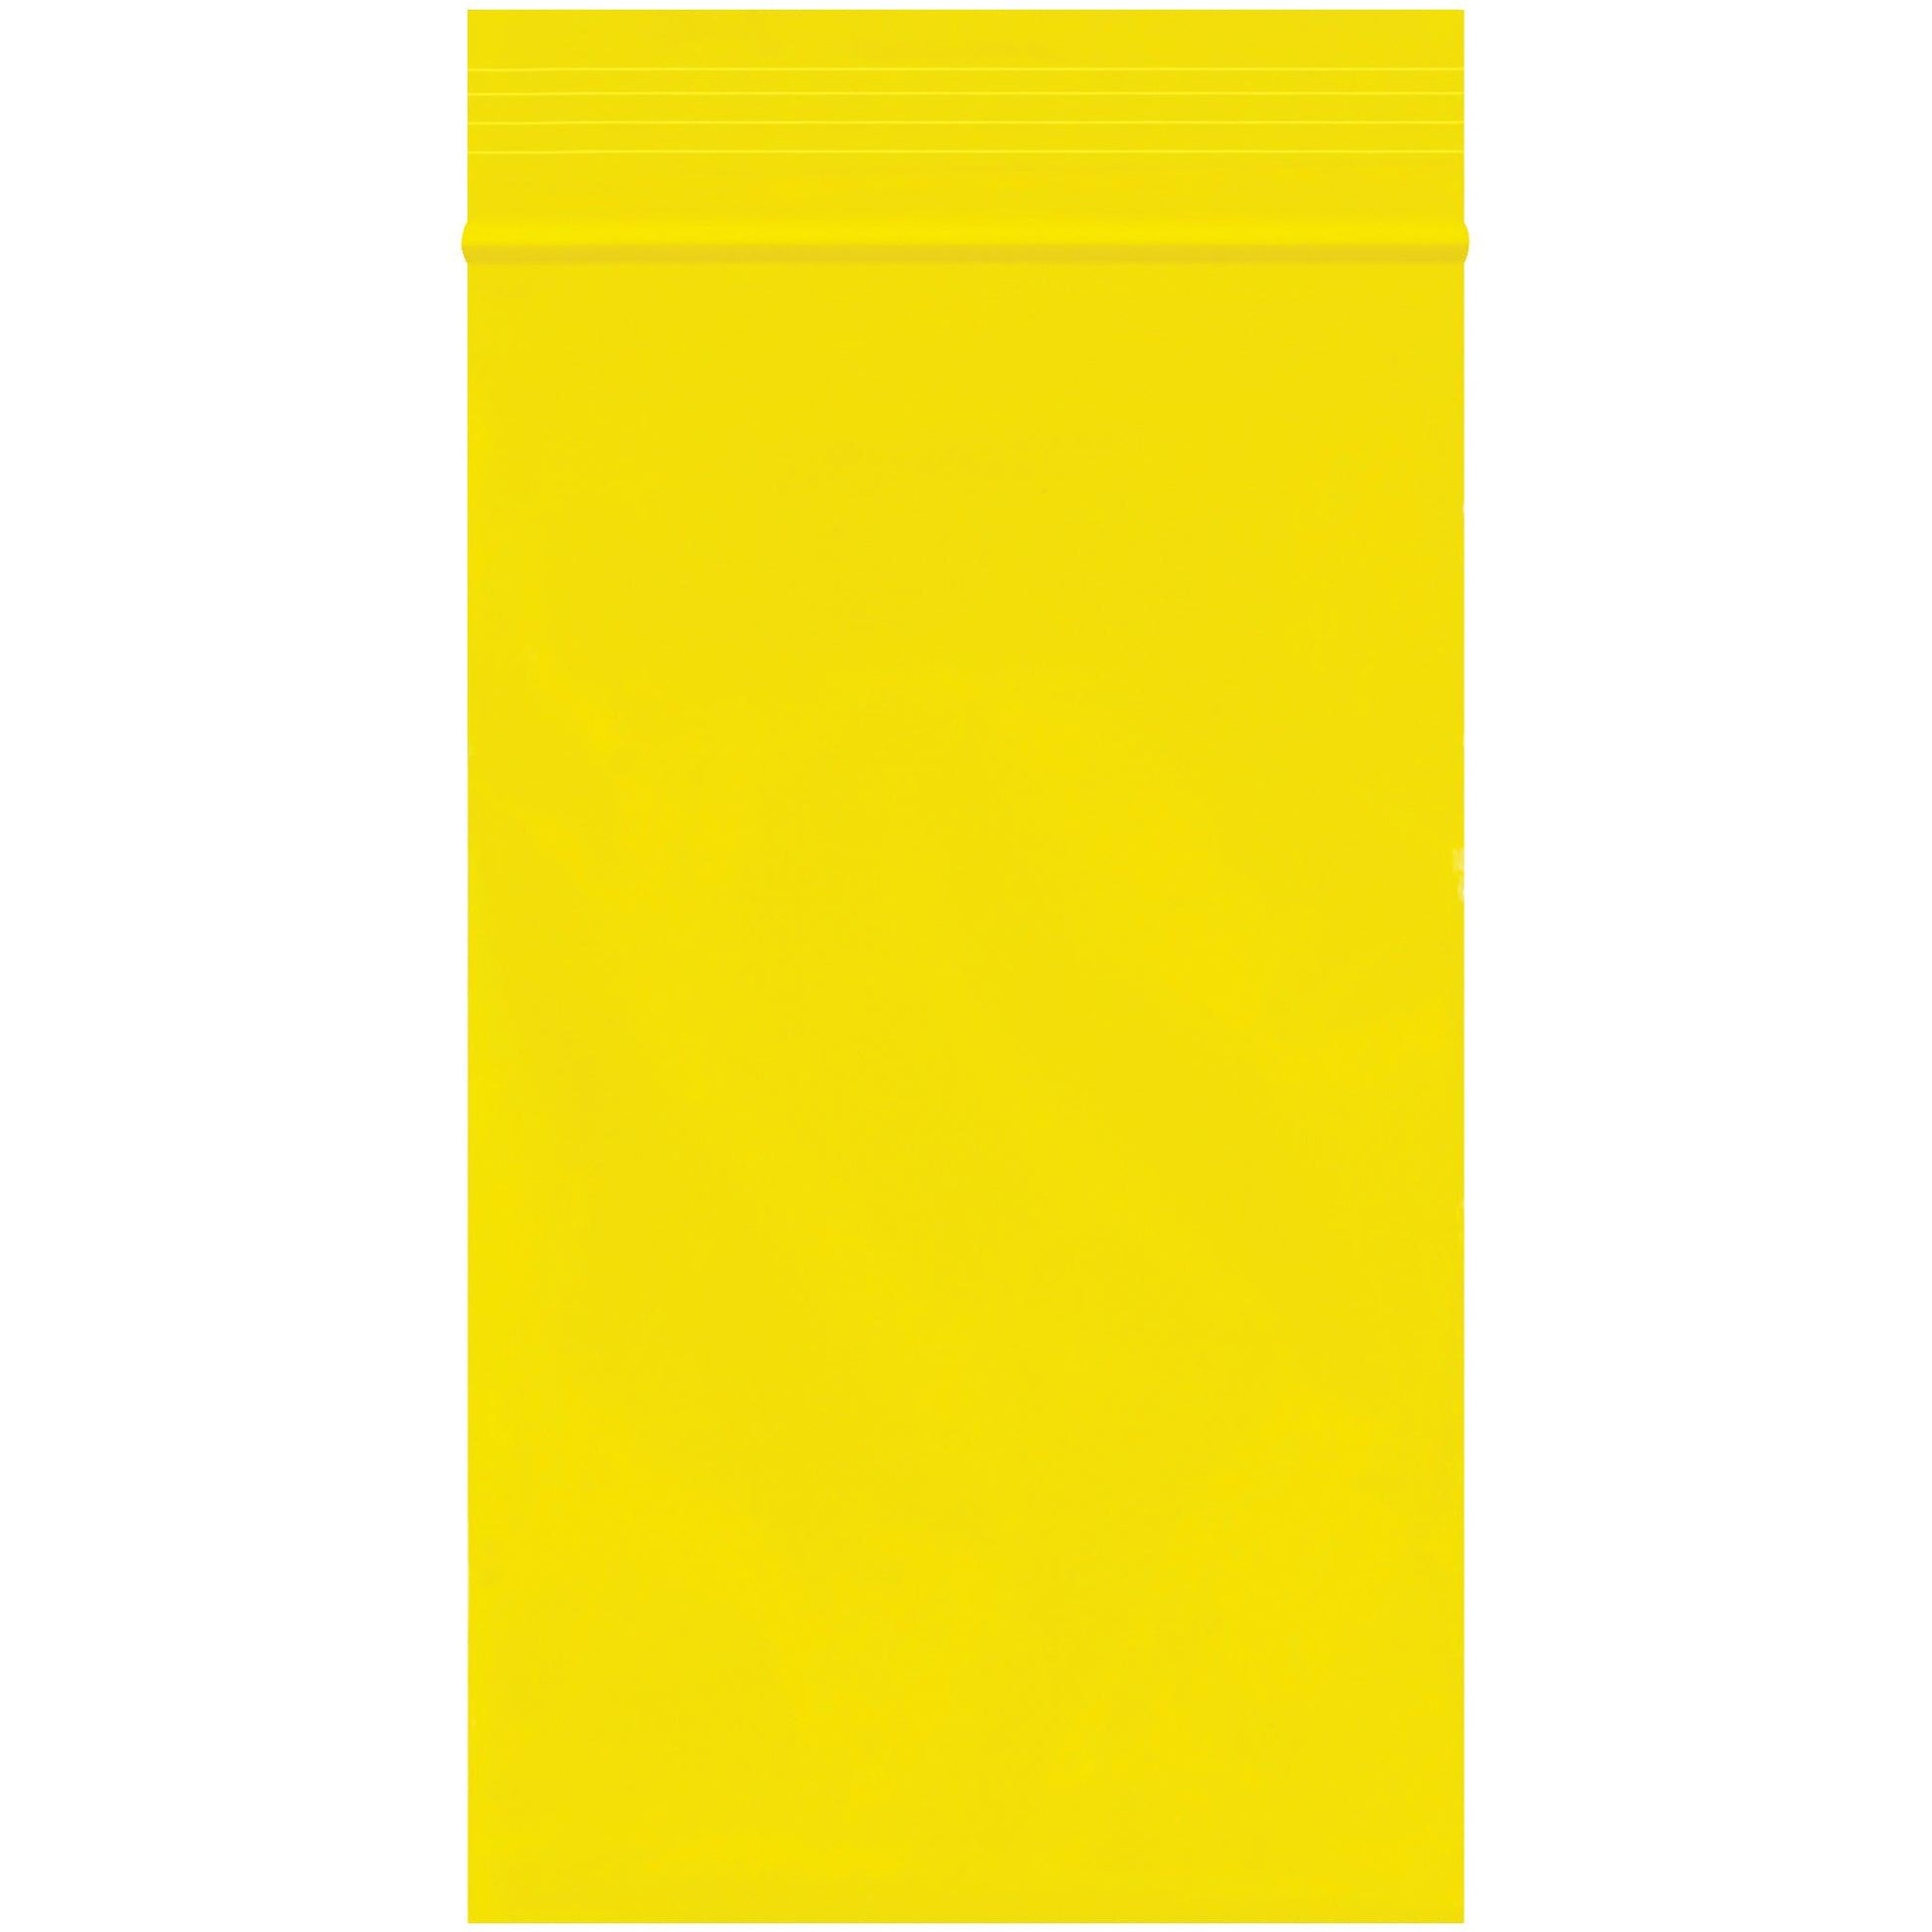 3 x 5" - 2 Mil Yellow Reclosable Poly Bags - PB3550Y